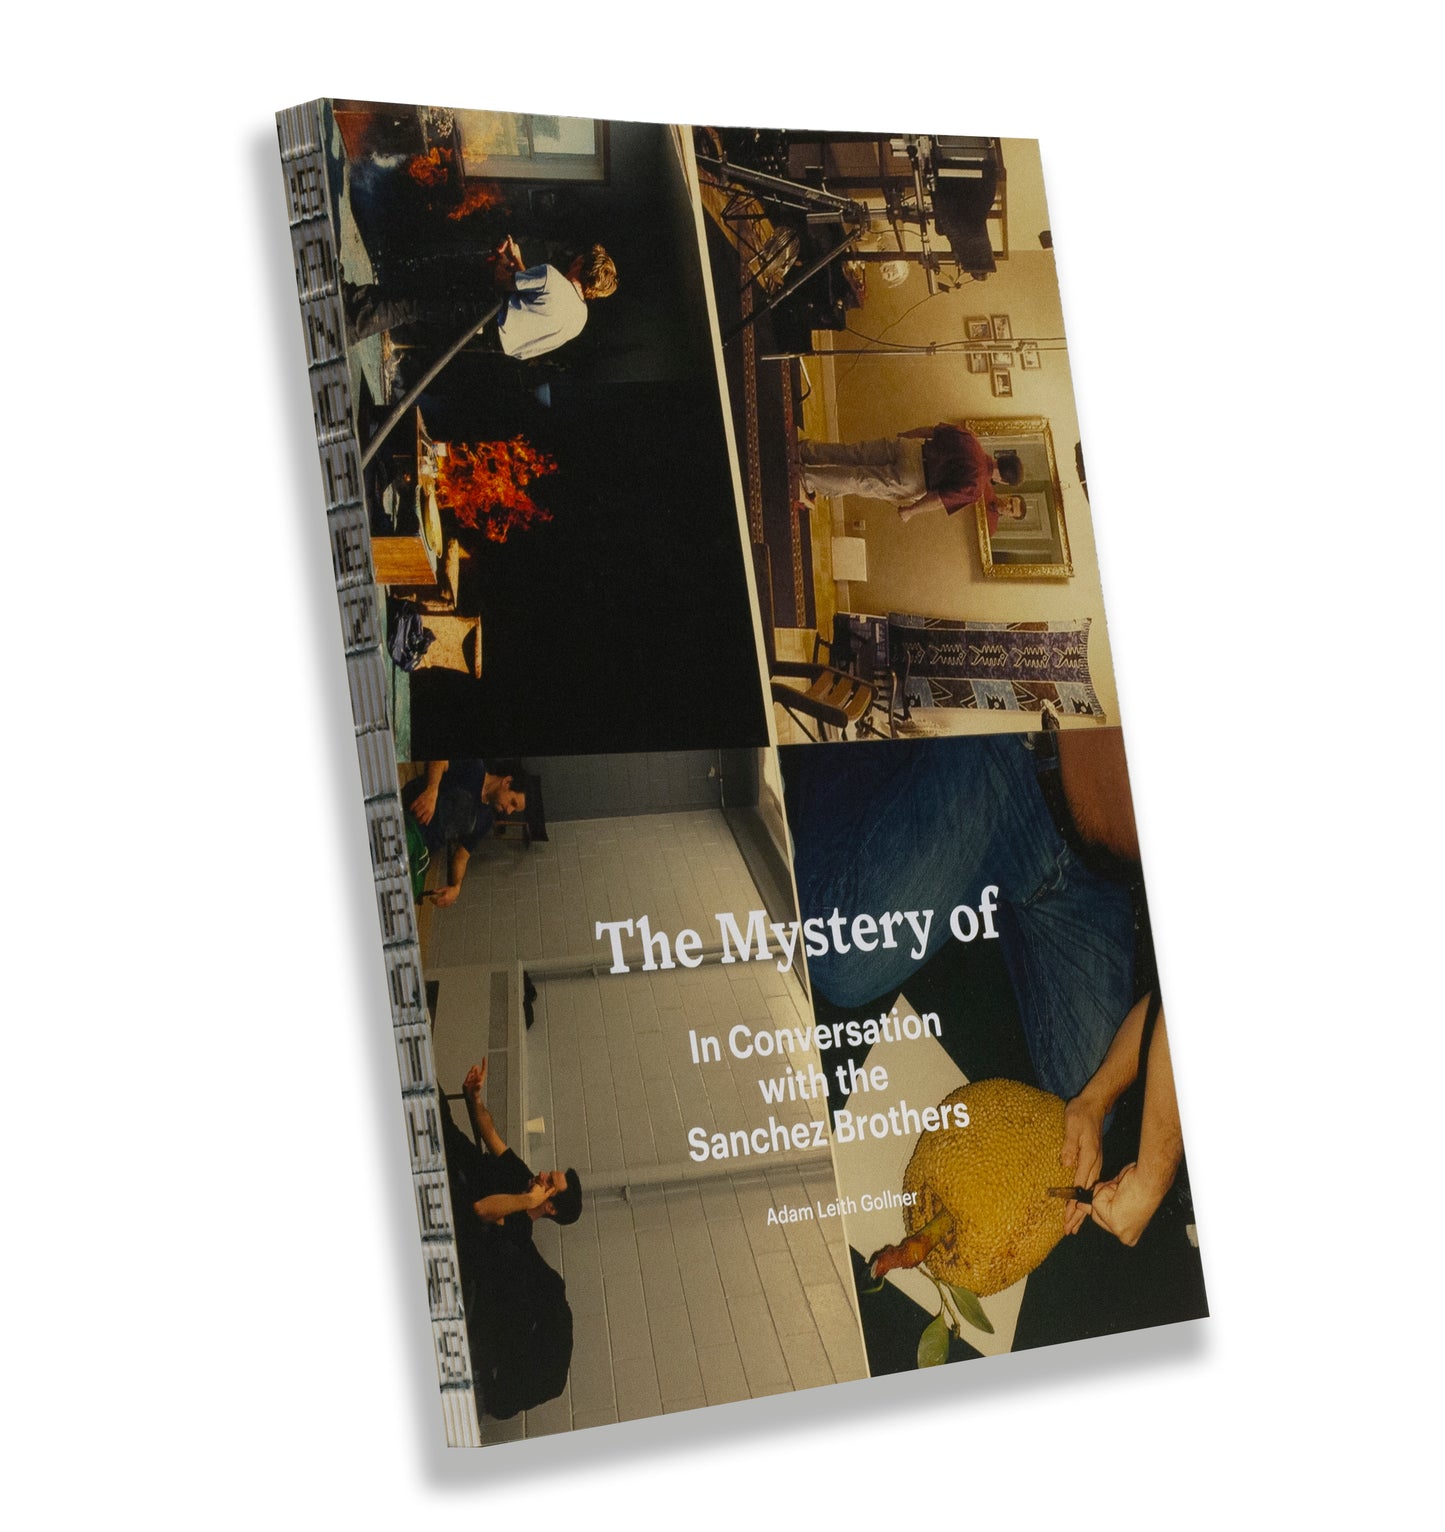 The Mystery of, In Conversation with the Sanchez Brothers by Adam Leith Gollner